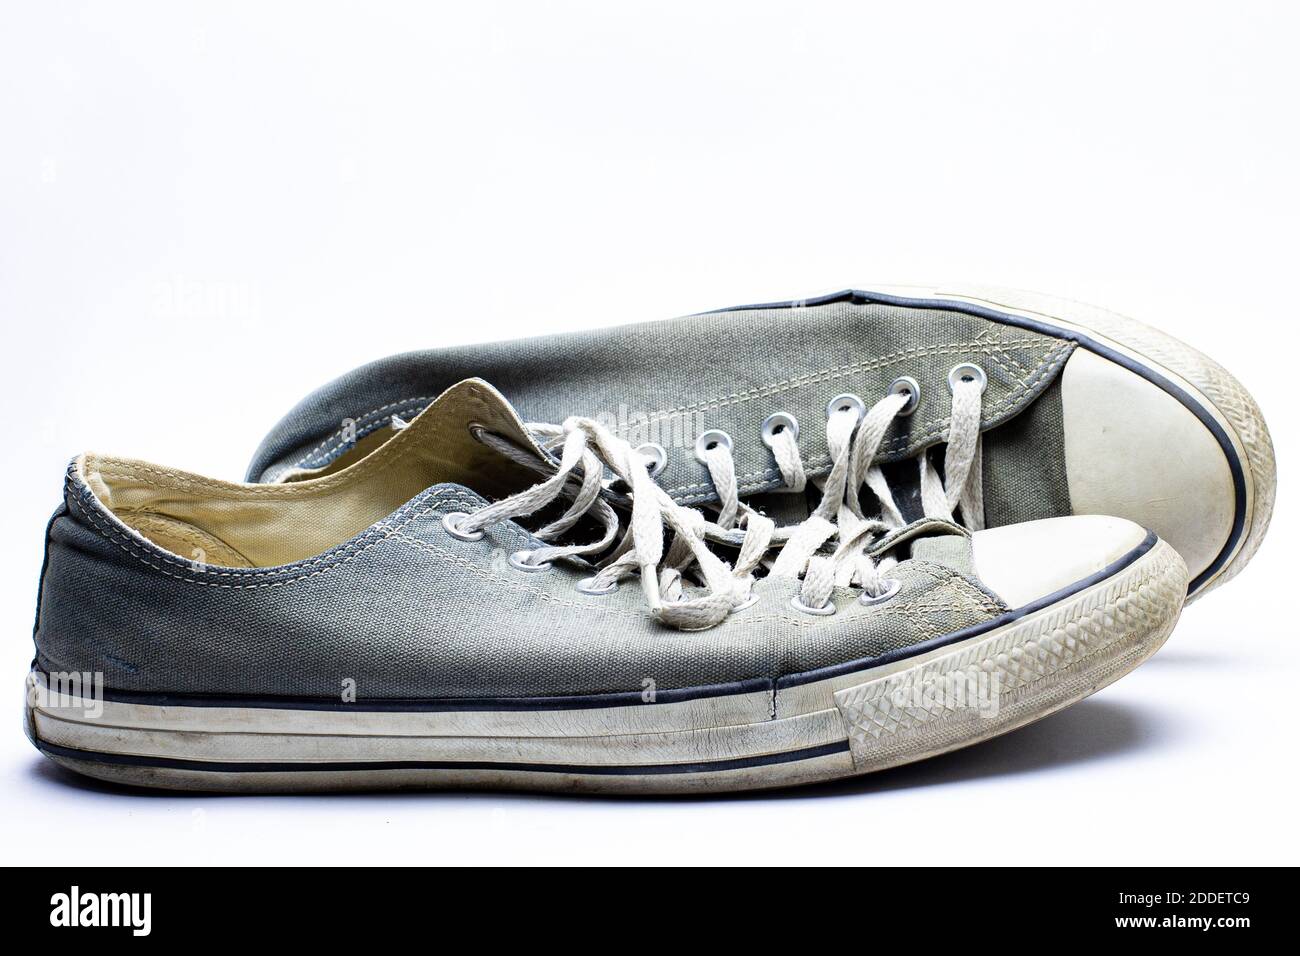 Old dirty sneakers worn out by years of use Stock Photo - Alamy